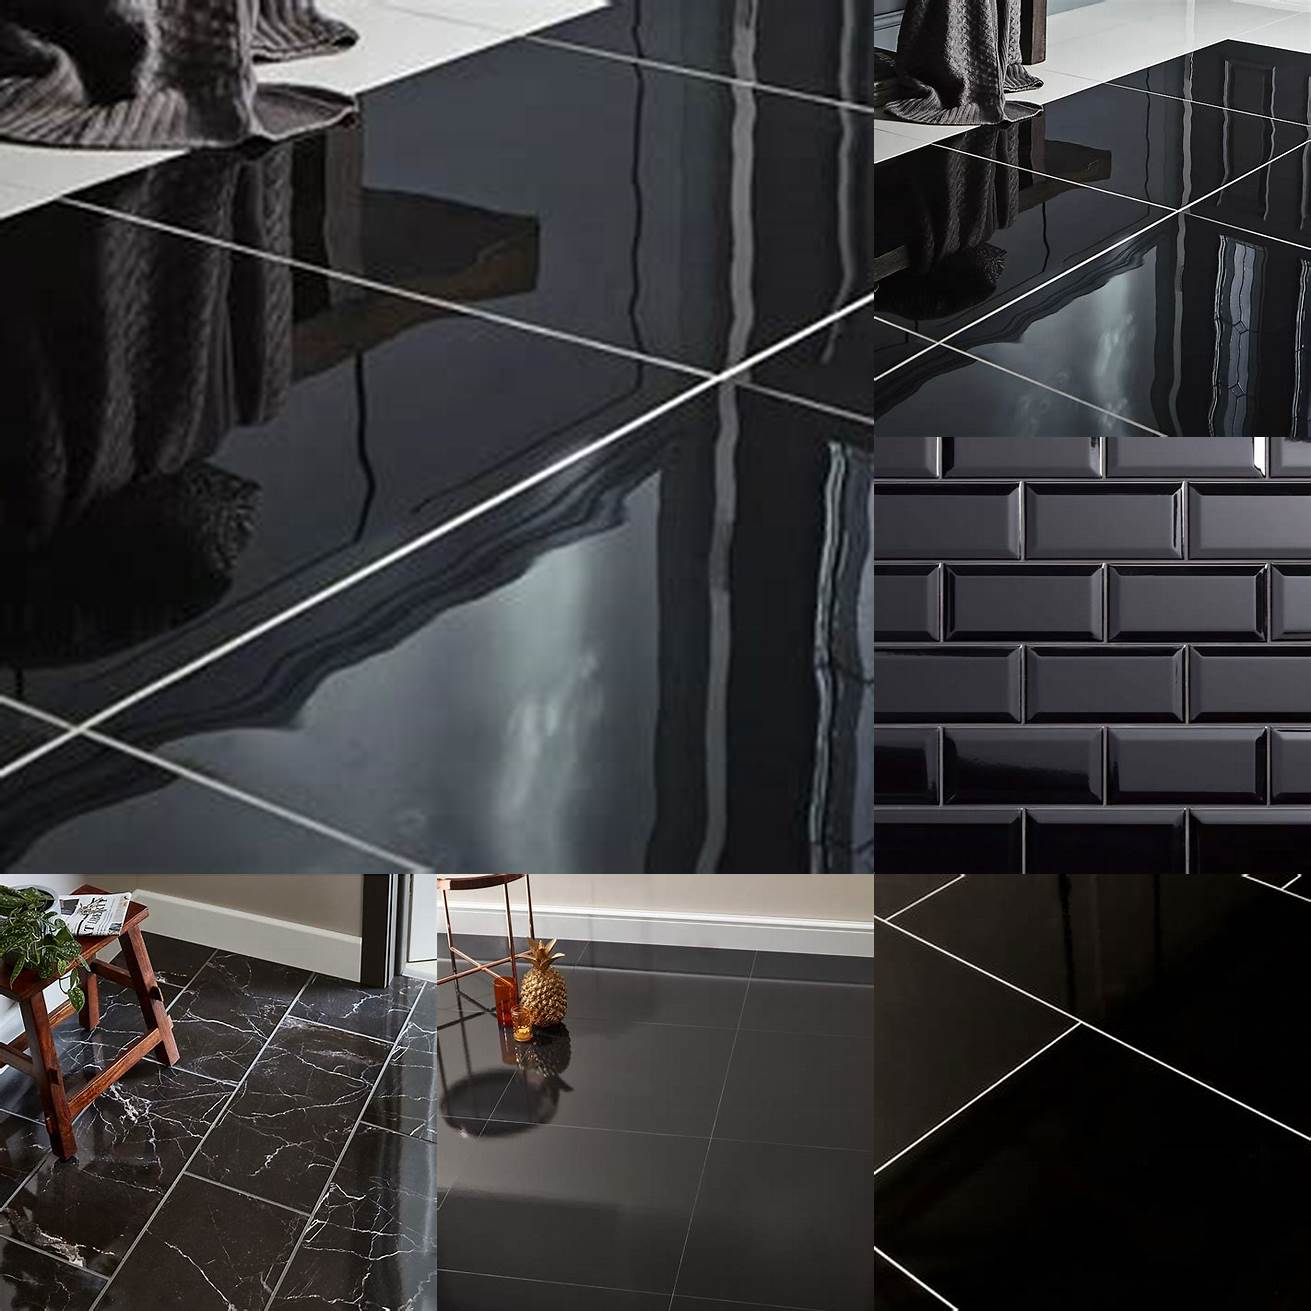 Glossy black tiles with a metallic finish